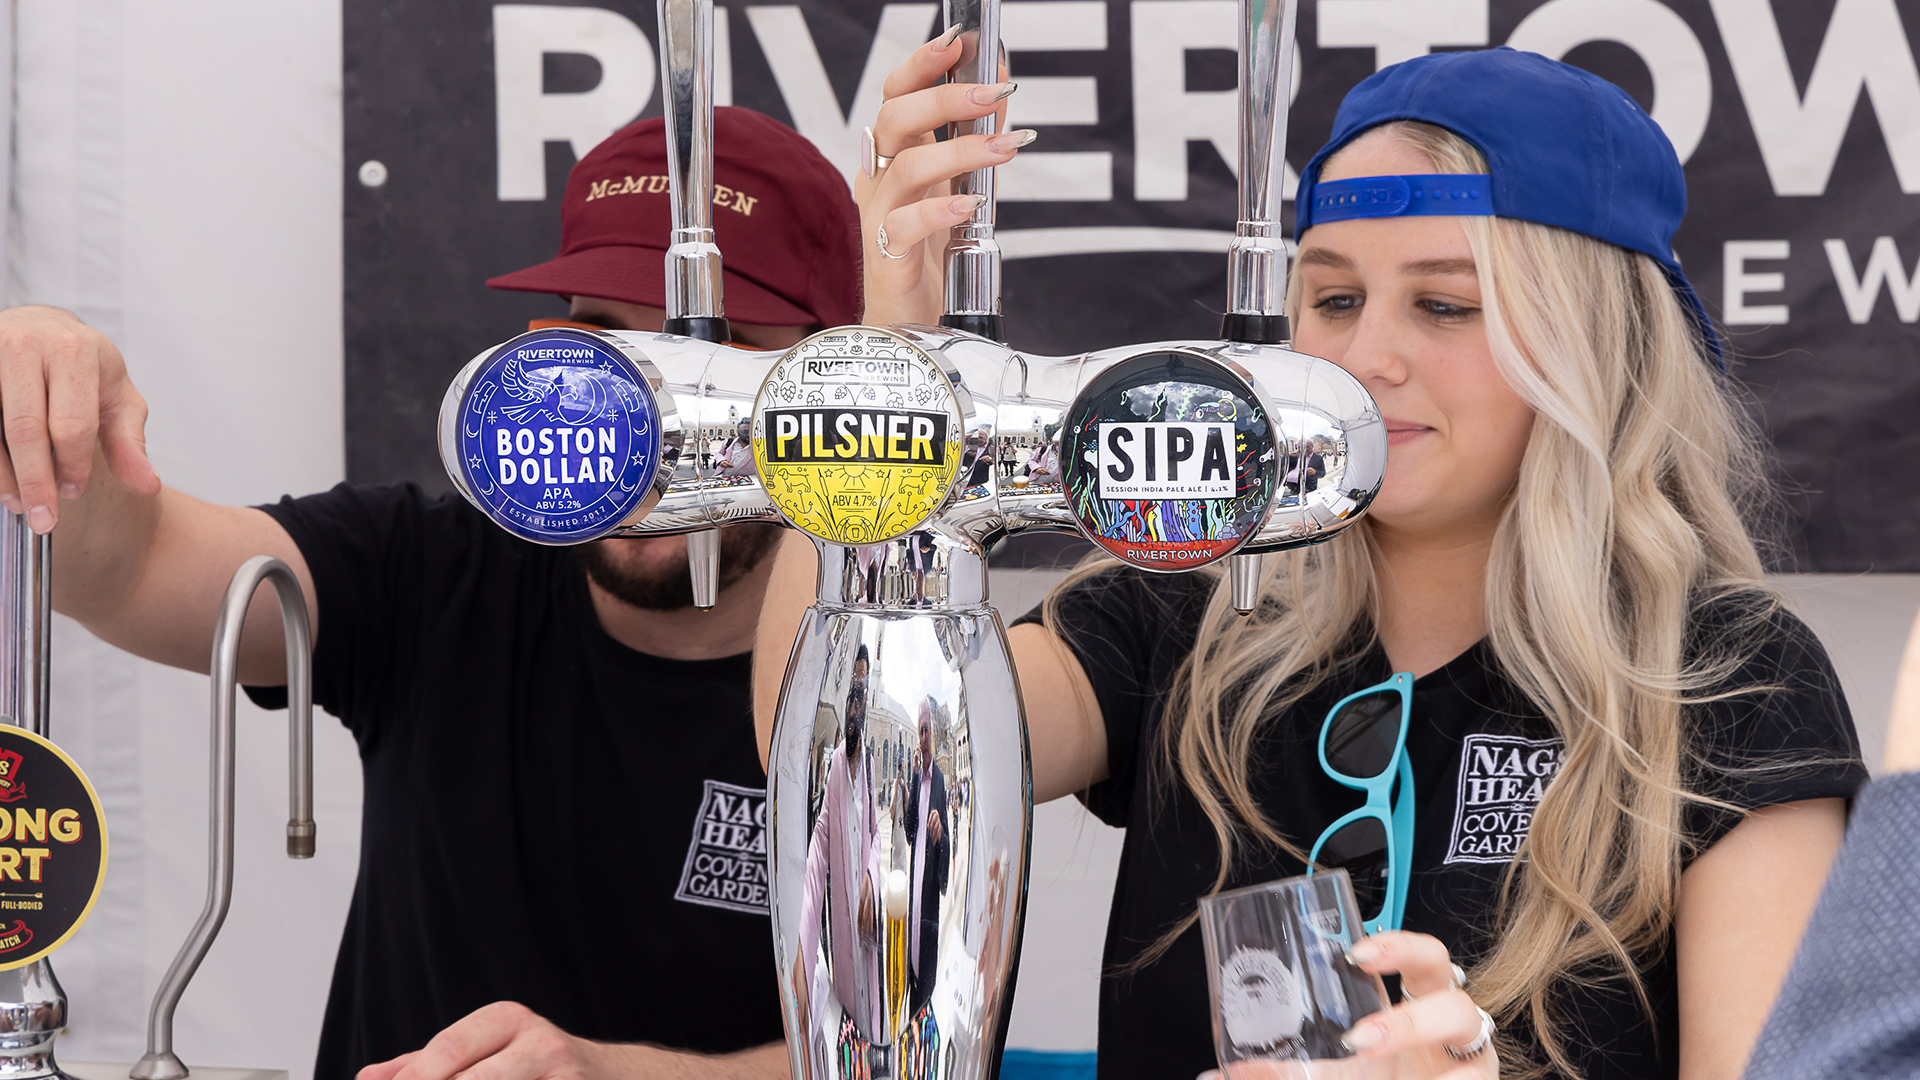 Two people, one wearing a red cap with writing 'McMullen' and one wearing a black cap backwards pulling pints. The beer taps have the colourful logos of the beers with text overlayed 'Rivertown Boston Dollar', 'Rivertown Pilsner' 'SIPA Rivertown'.